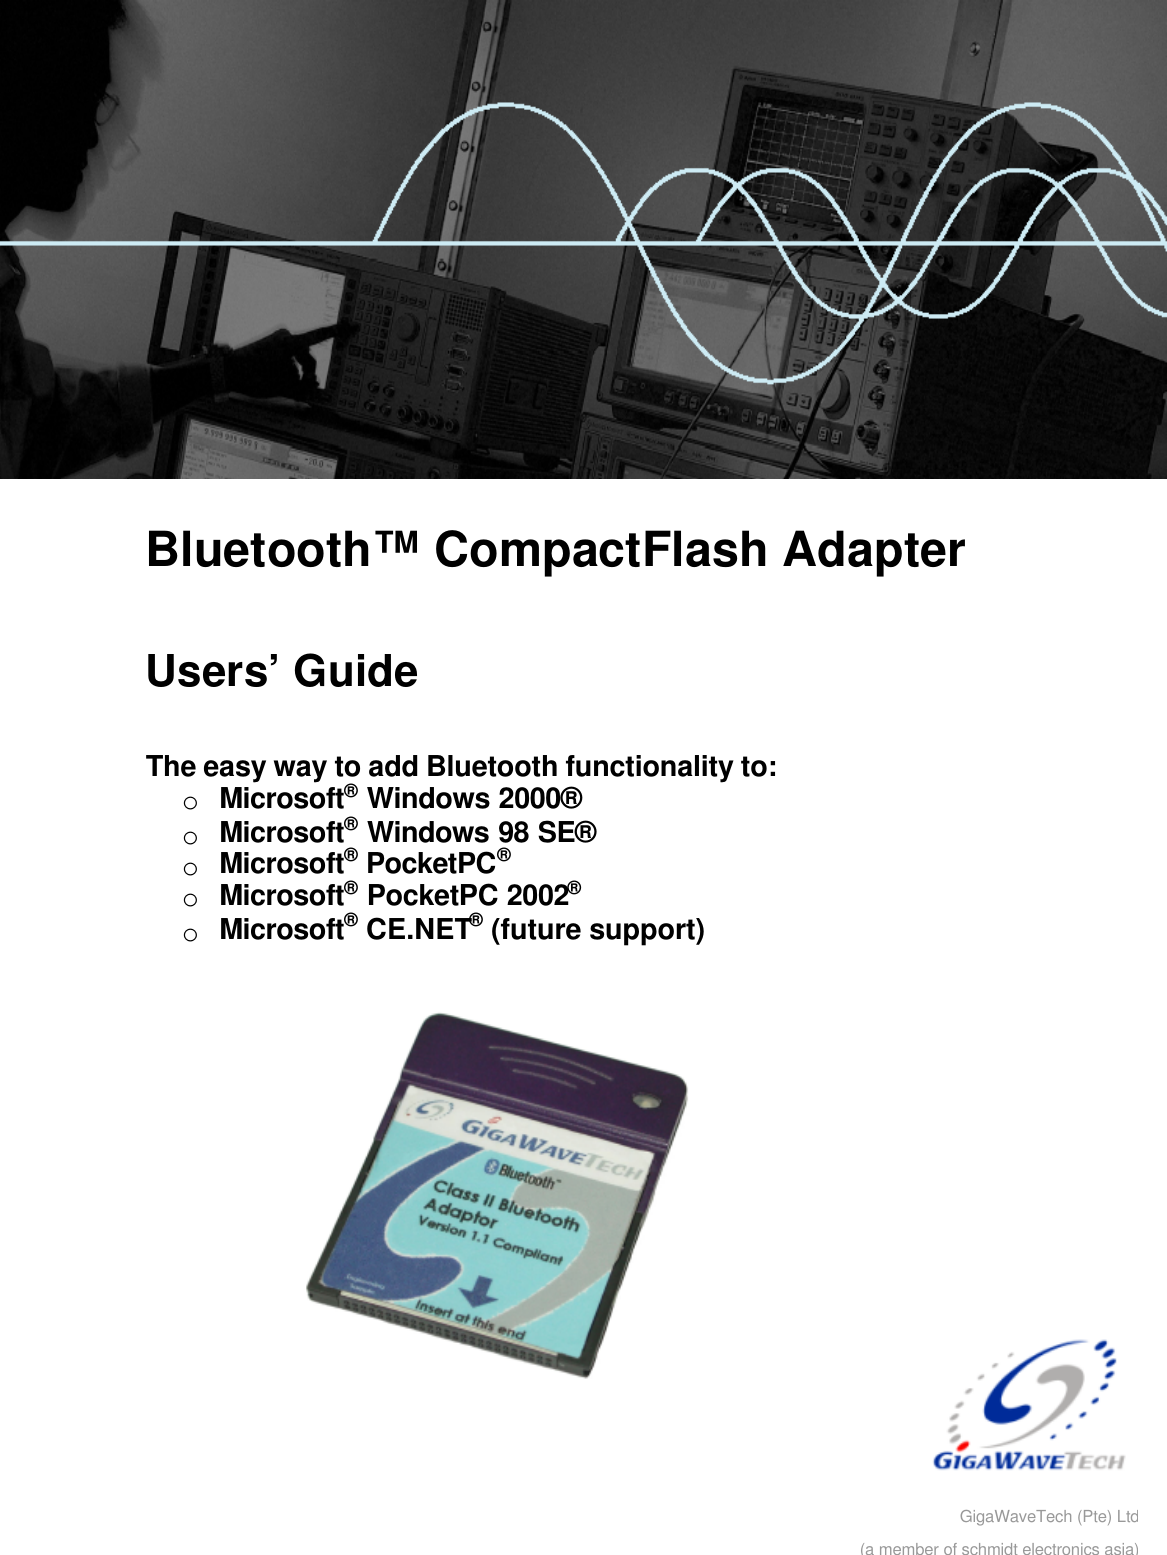         Bluetooth™ CompactFlash Adapter  Users’ Guide  The easy way to add Bluetooth functionality to: o Microsoft® Windows 2000® o Microsoft® Windows 98 SE® o Microsoft® PocketPC®  o Microsoft® PocketPC 2002® o Microsoft® CE.NET® (future support)    GigaWaveTech (Pte) Ltd(a member of schmidt electronics asia)